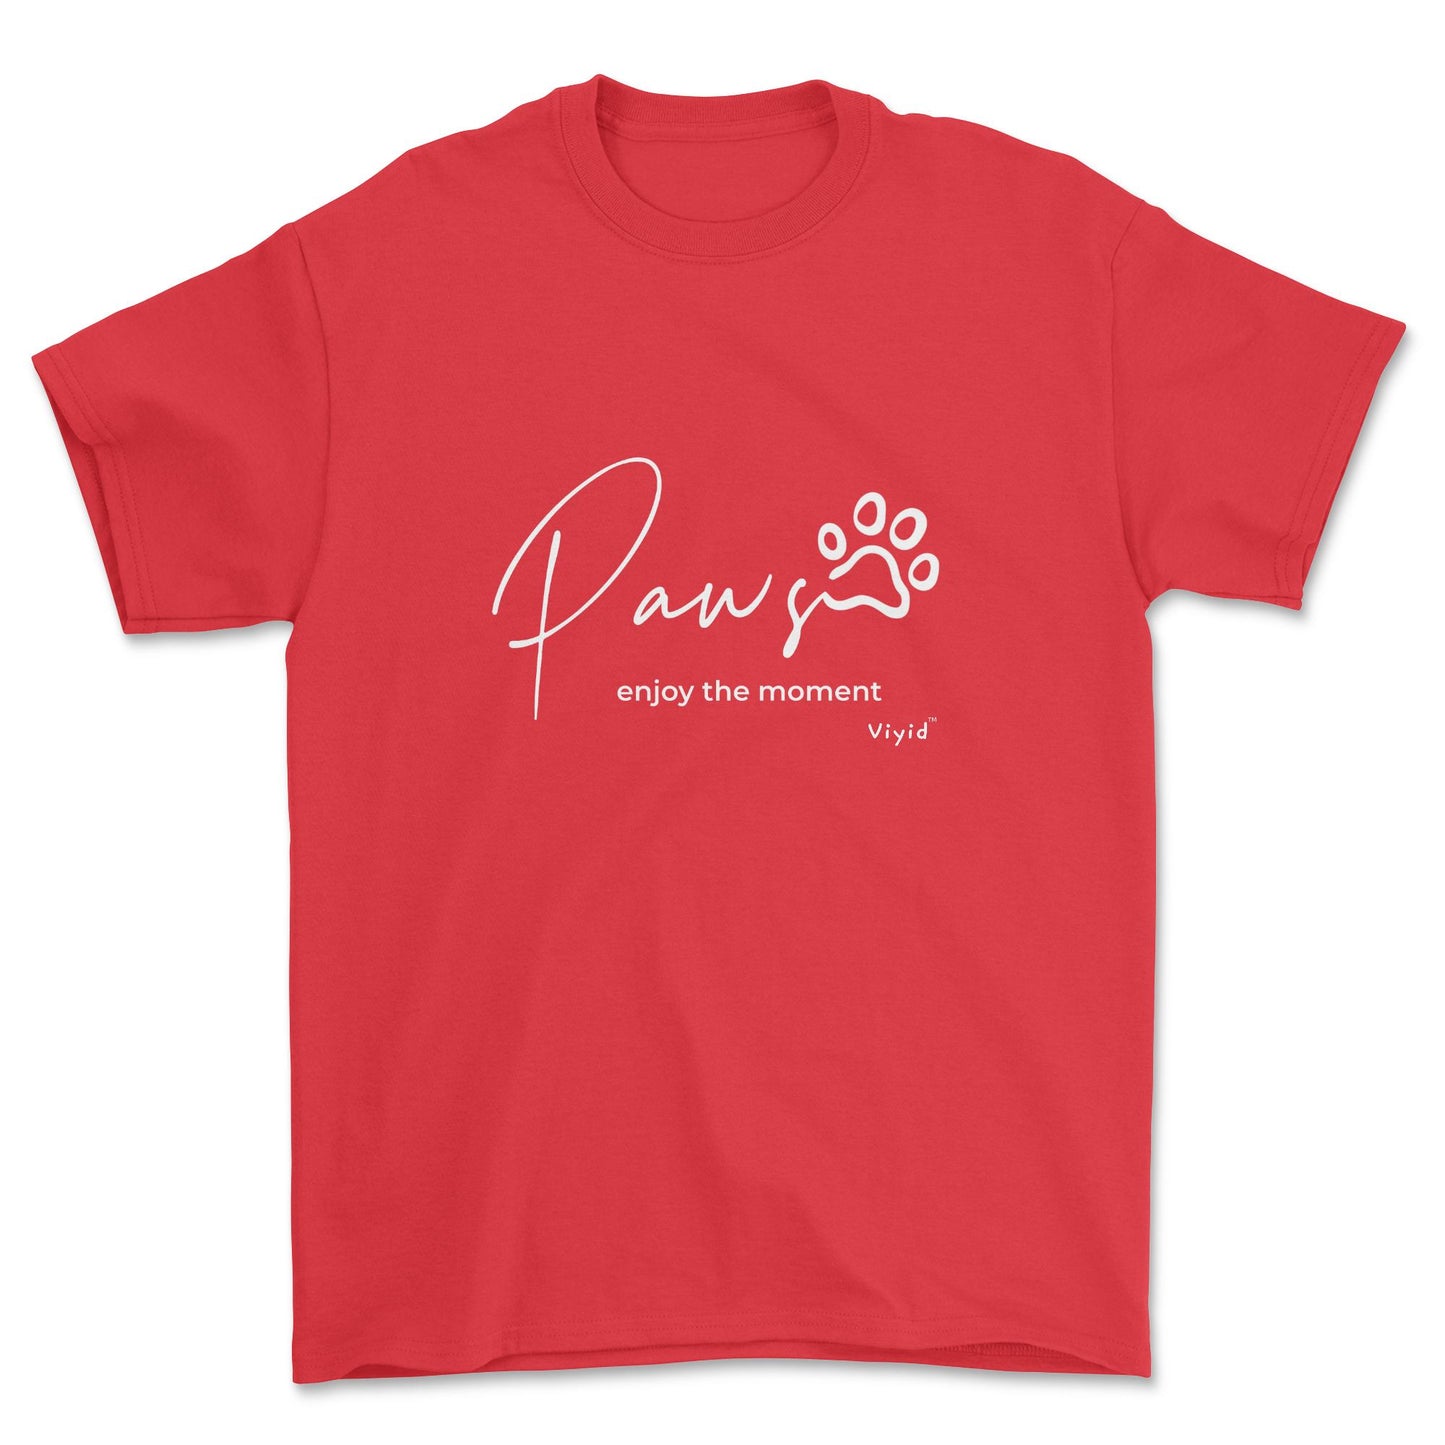 paws enjoy the moment youth t-shirt red